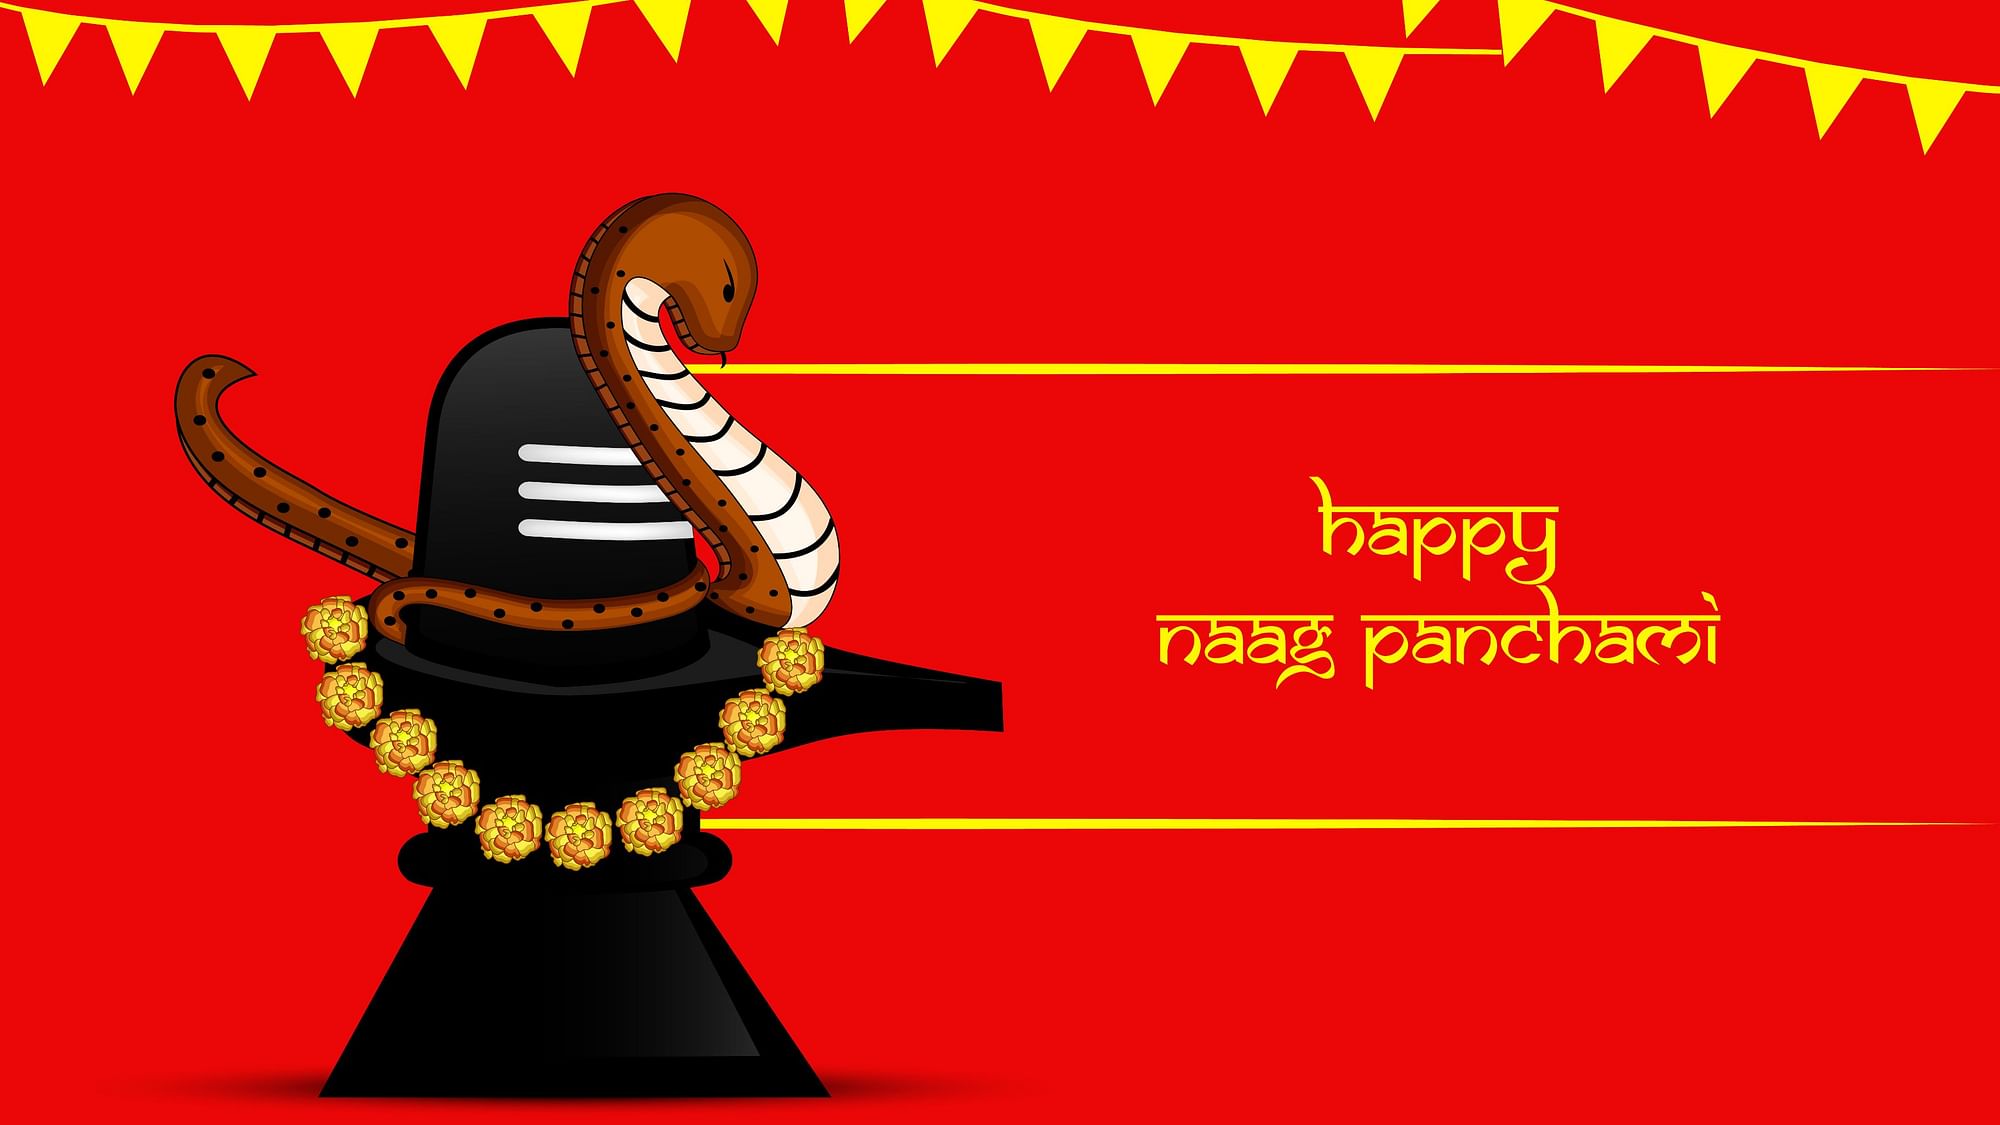 Happy Nag Panchami 2020 Wishes Quotes in English-Hindi, Images, Status,  Messages, GIF, Photos, HD Wallpapers, SMS, Whatsapp, Instagram, Twitter &  Facebook